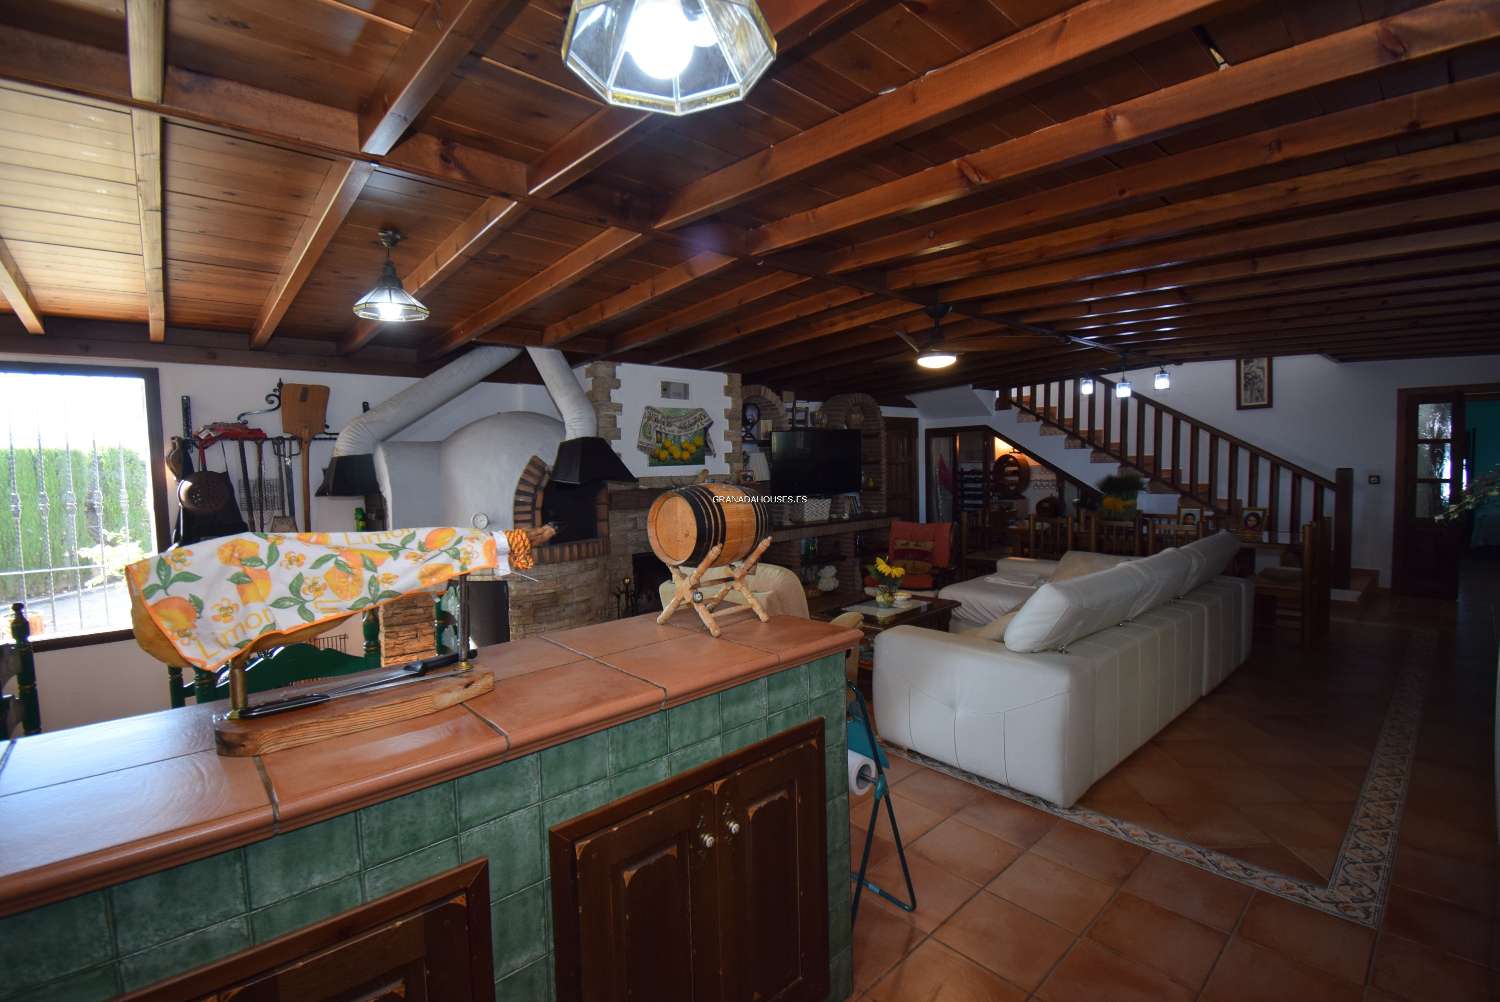 Fantastic detached villa with tennis court, swimming-pool and great views